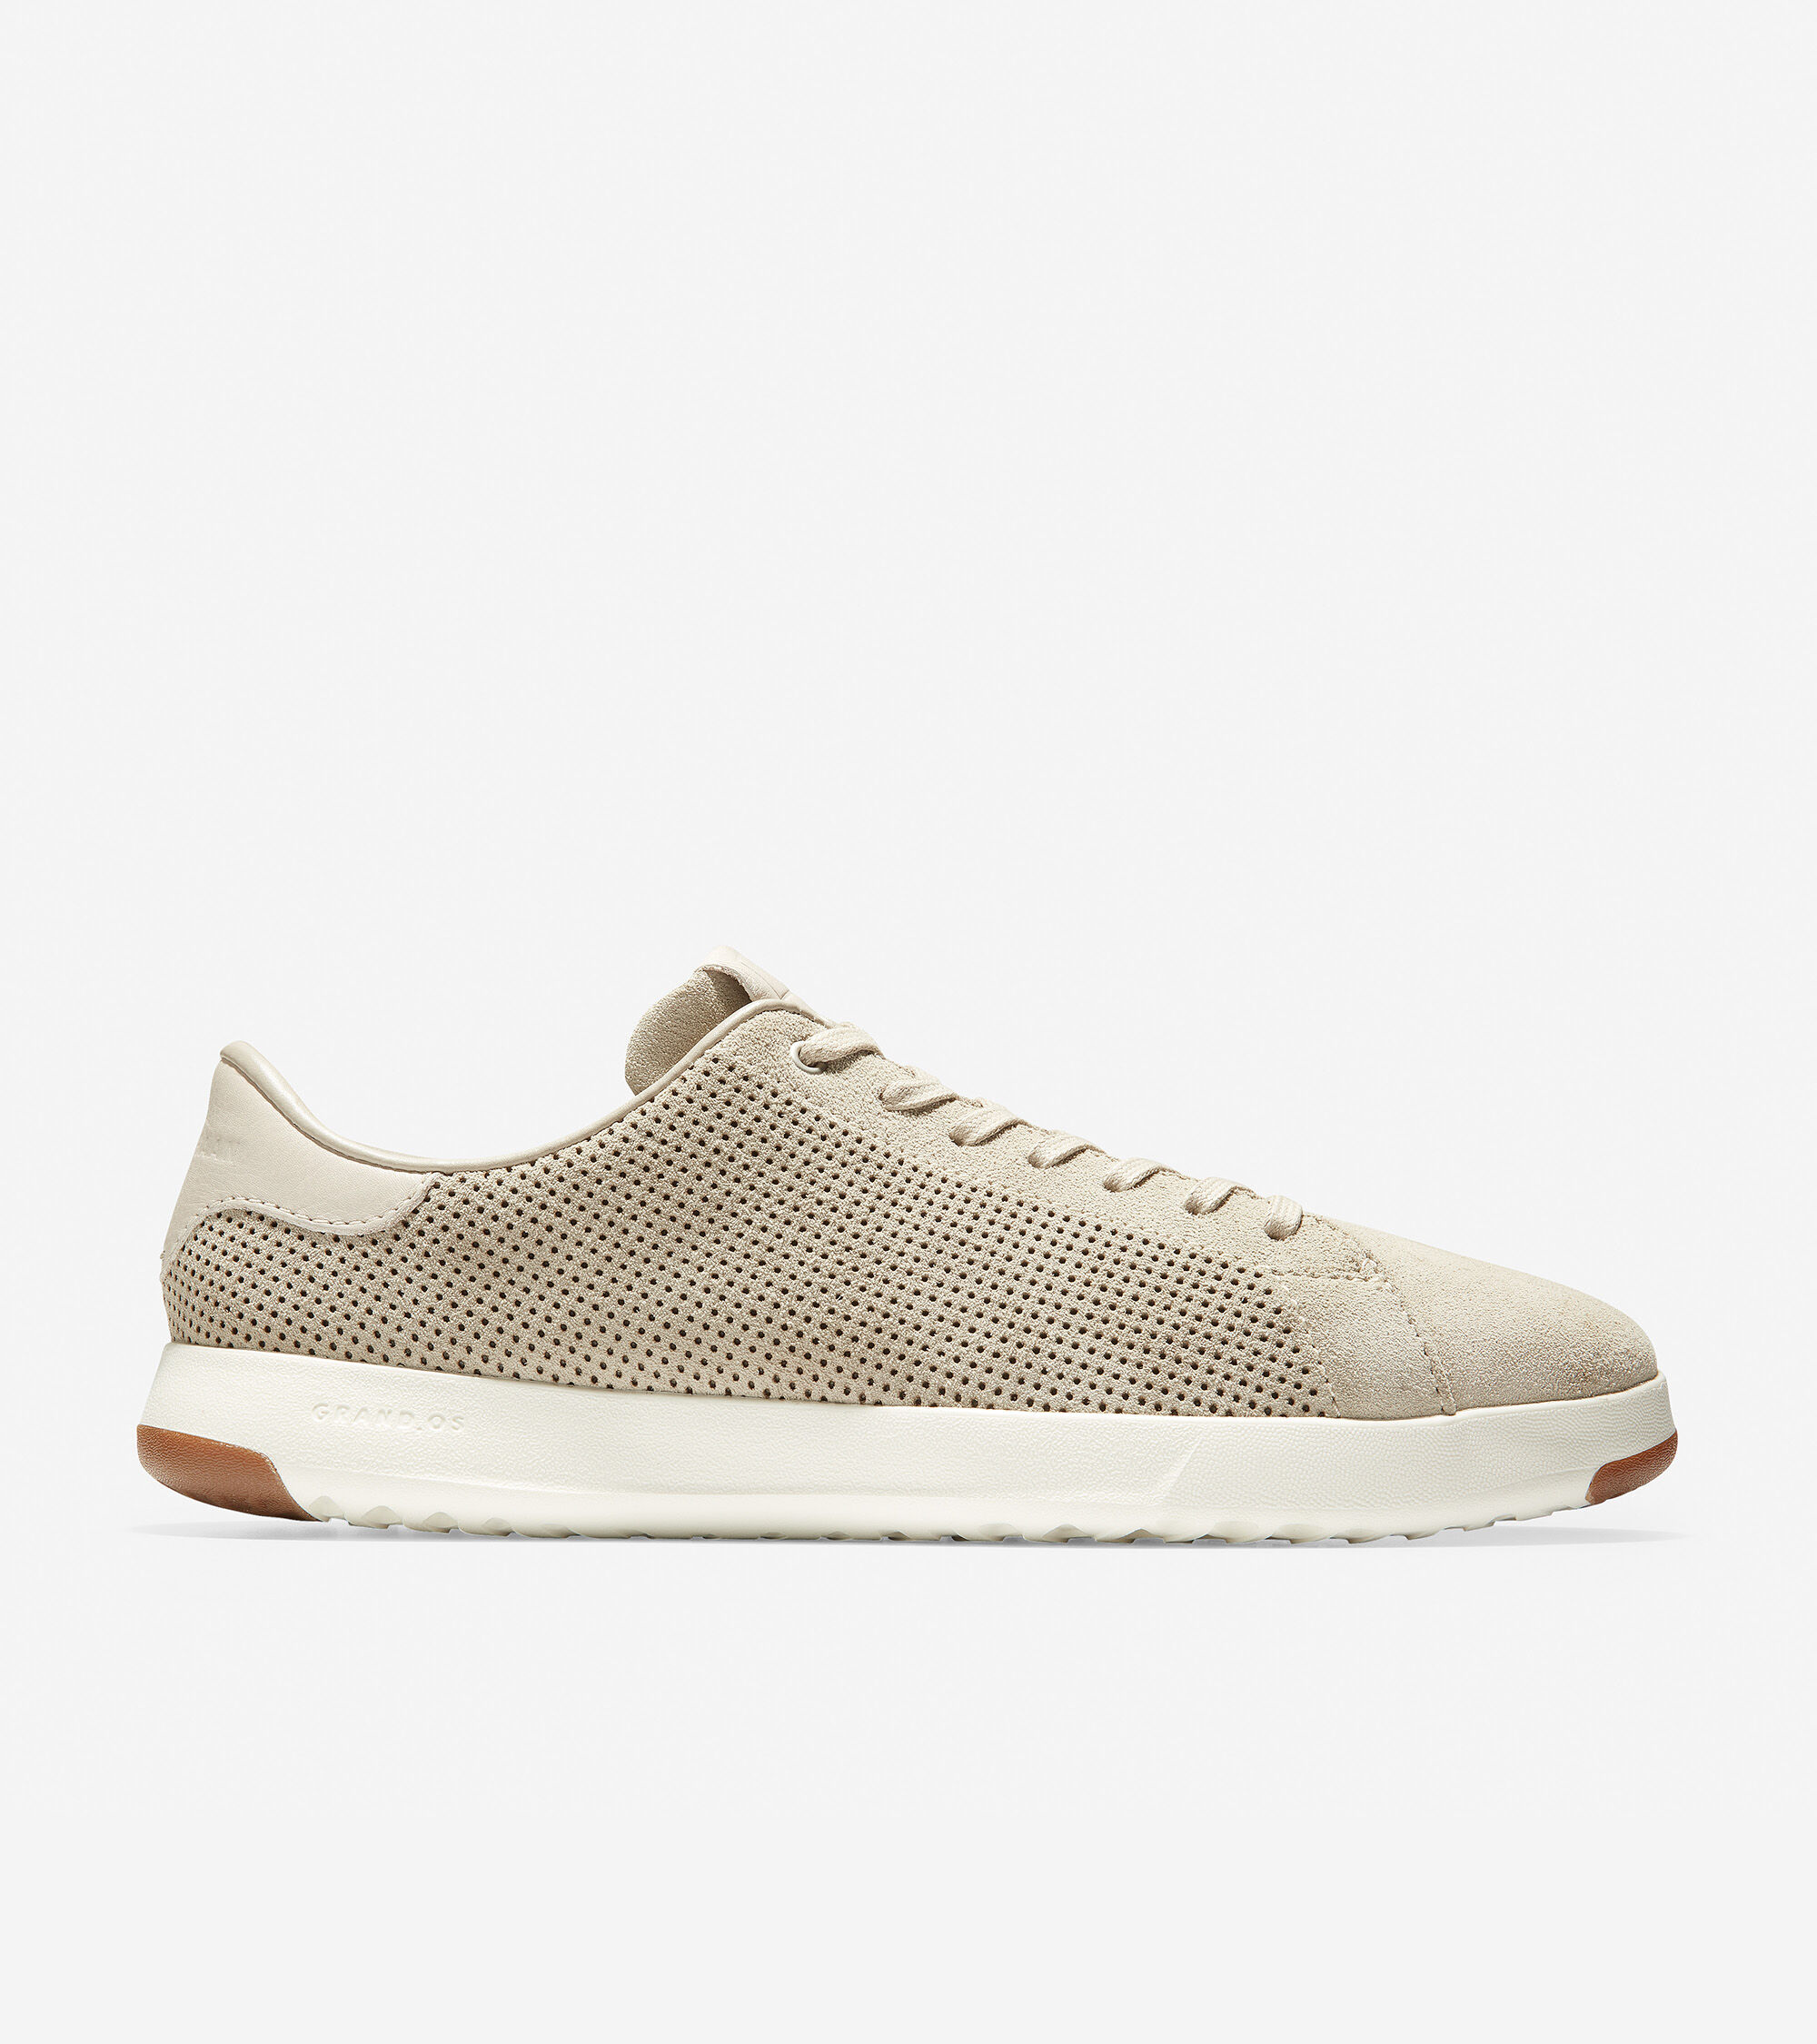 Hawthorn Suede Perf-Stone | Cole Haan